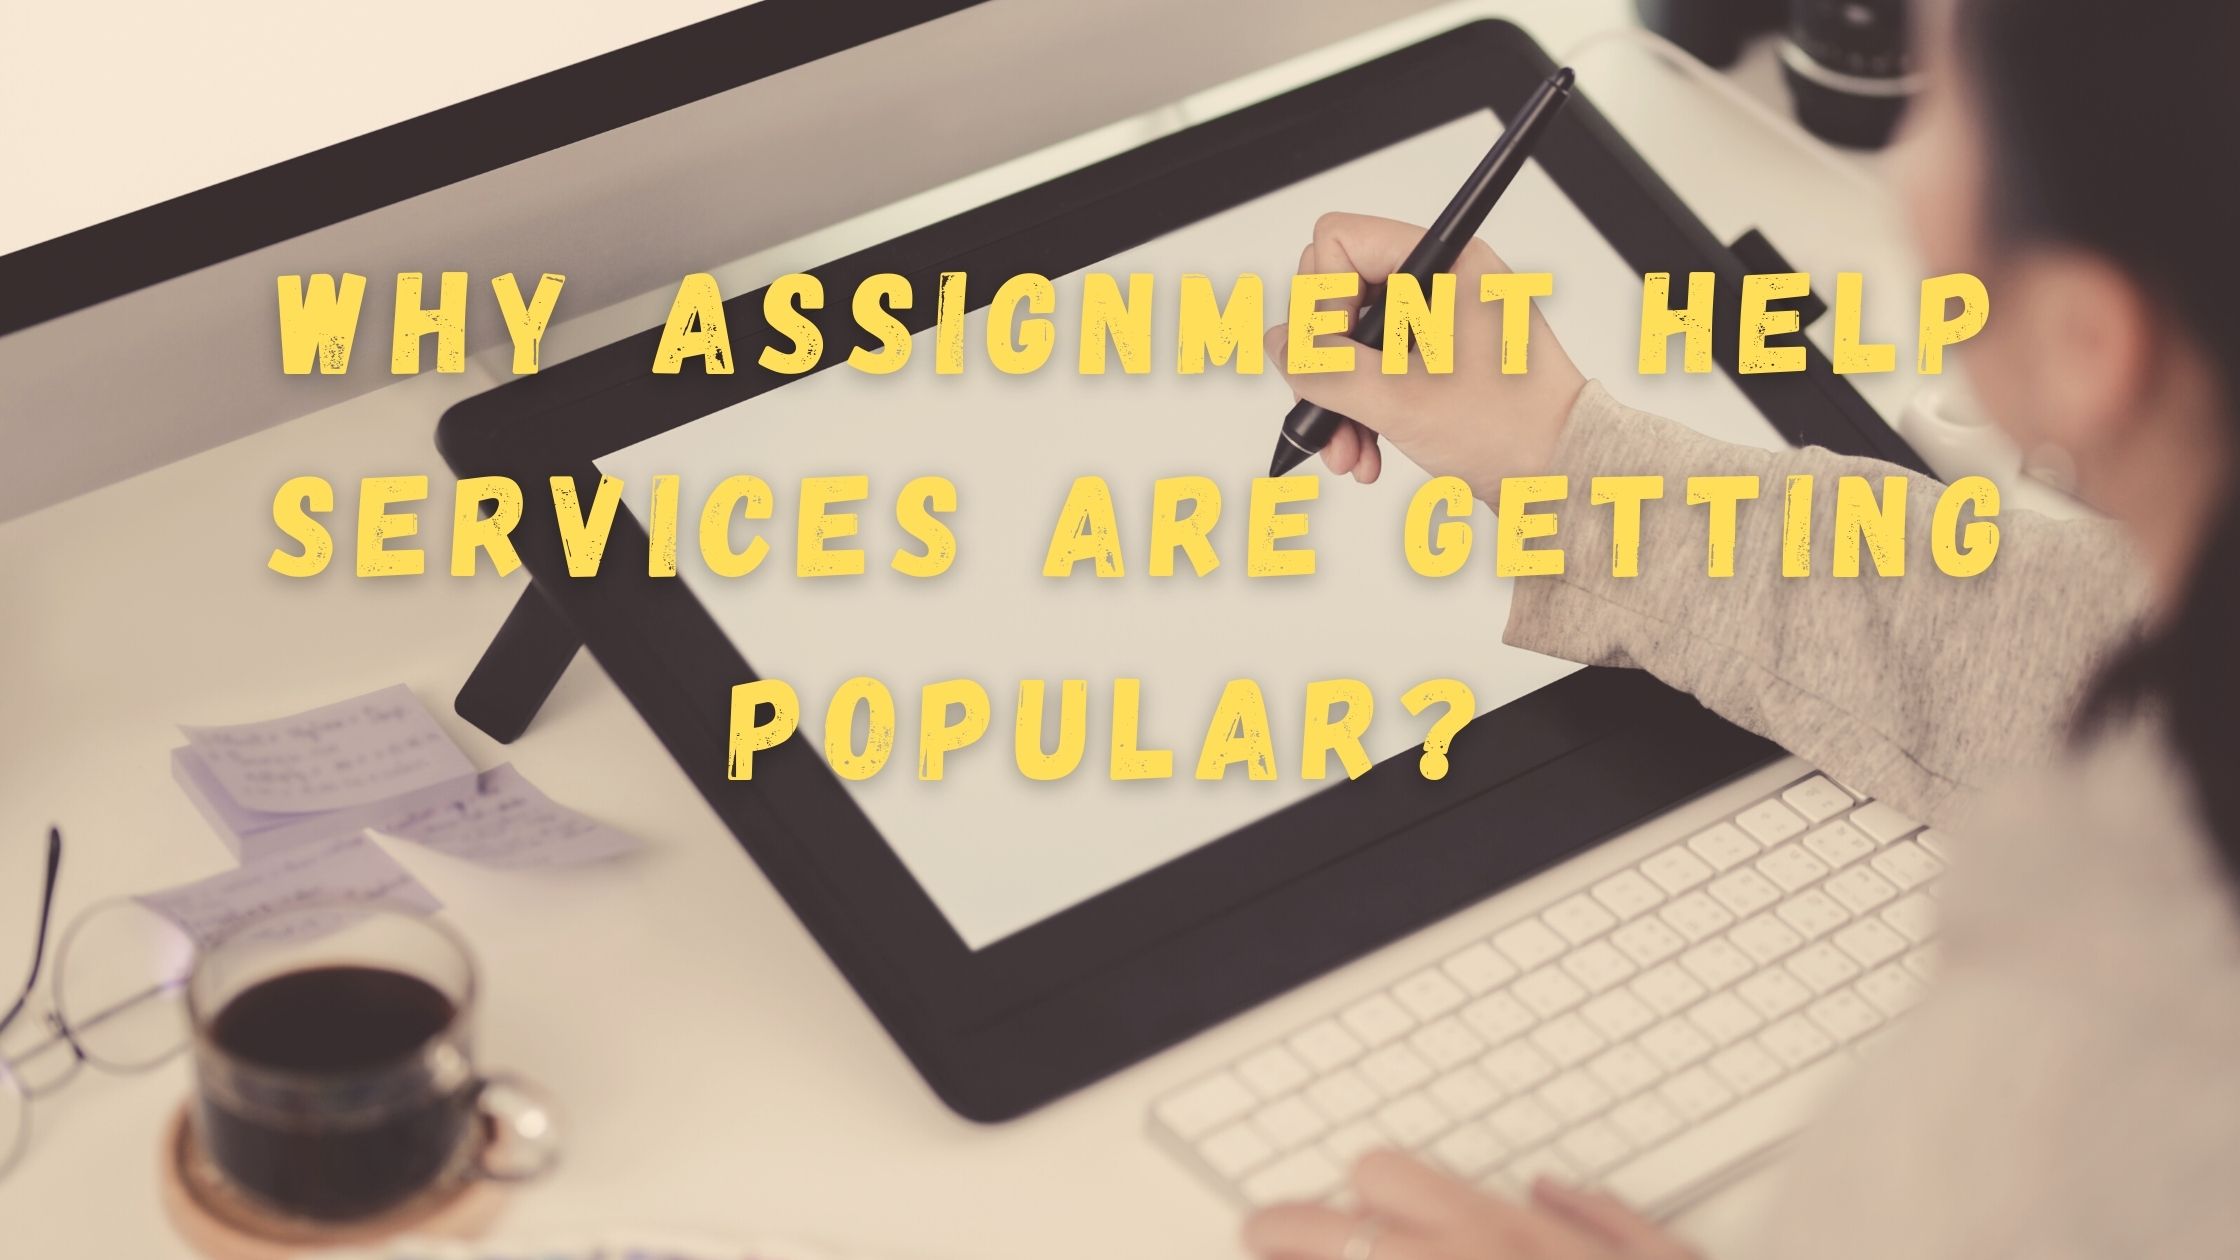 Why Assignment Help Services Are Getting Popular?